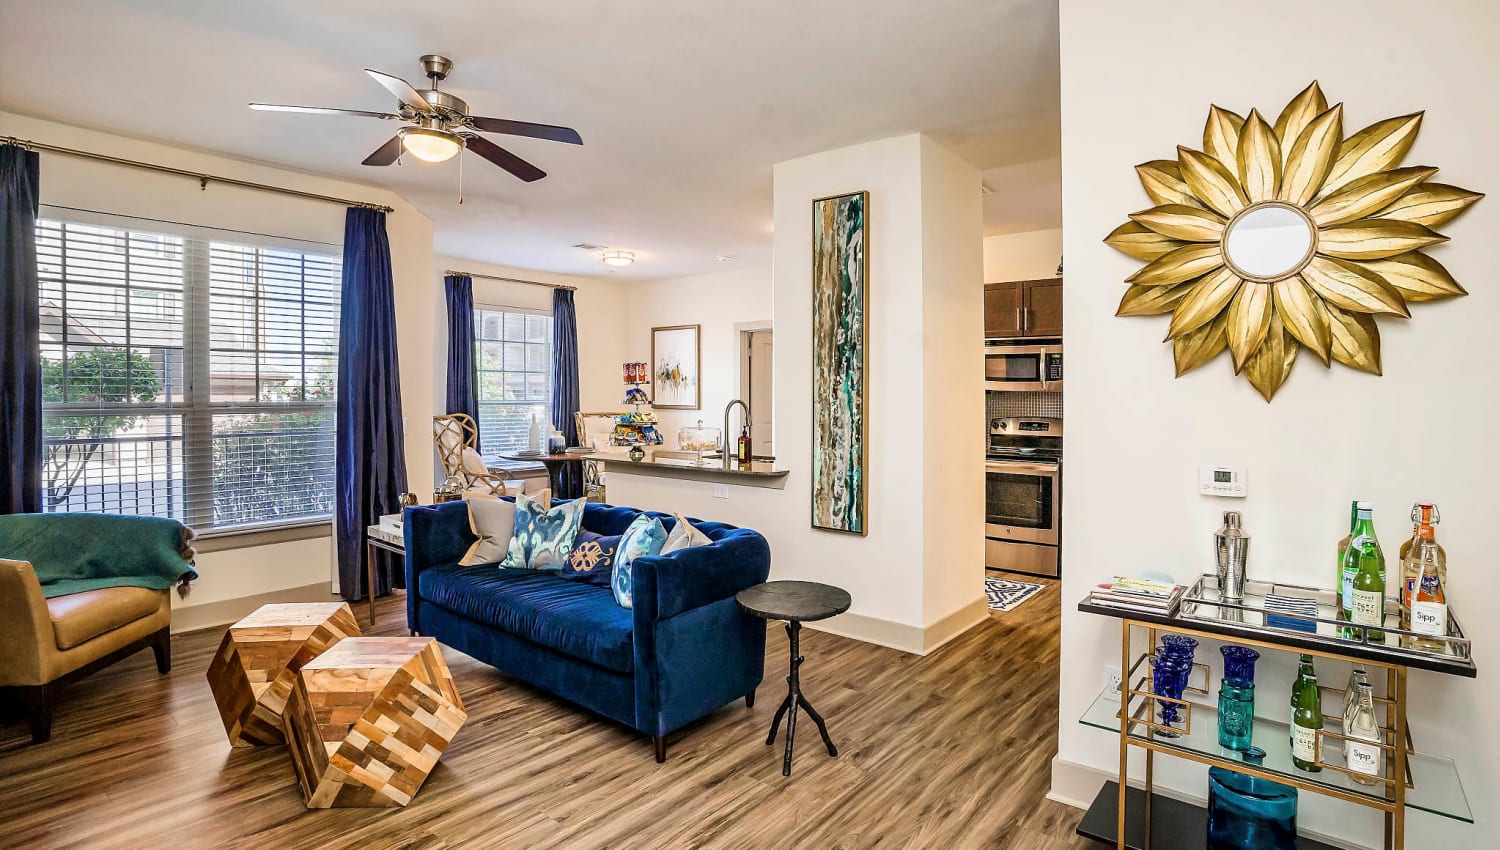 Ceiling fan and modern furnishings in a model home's living area at Sundance Creek in Midland, Texas